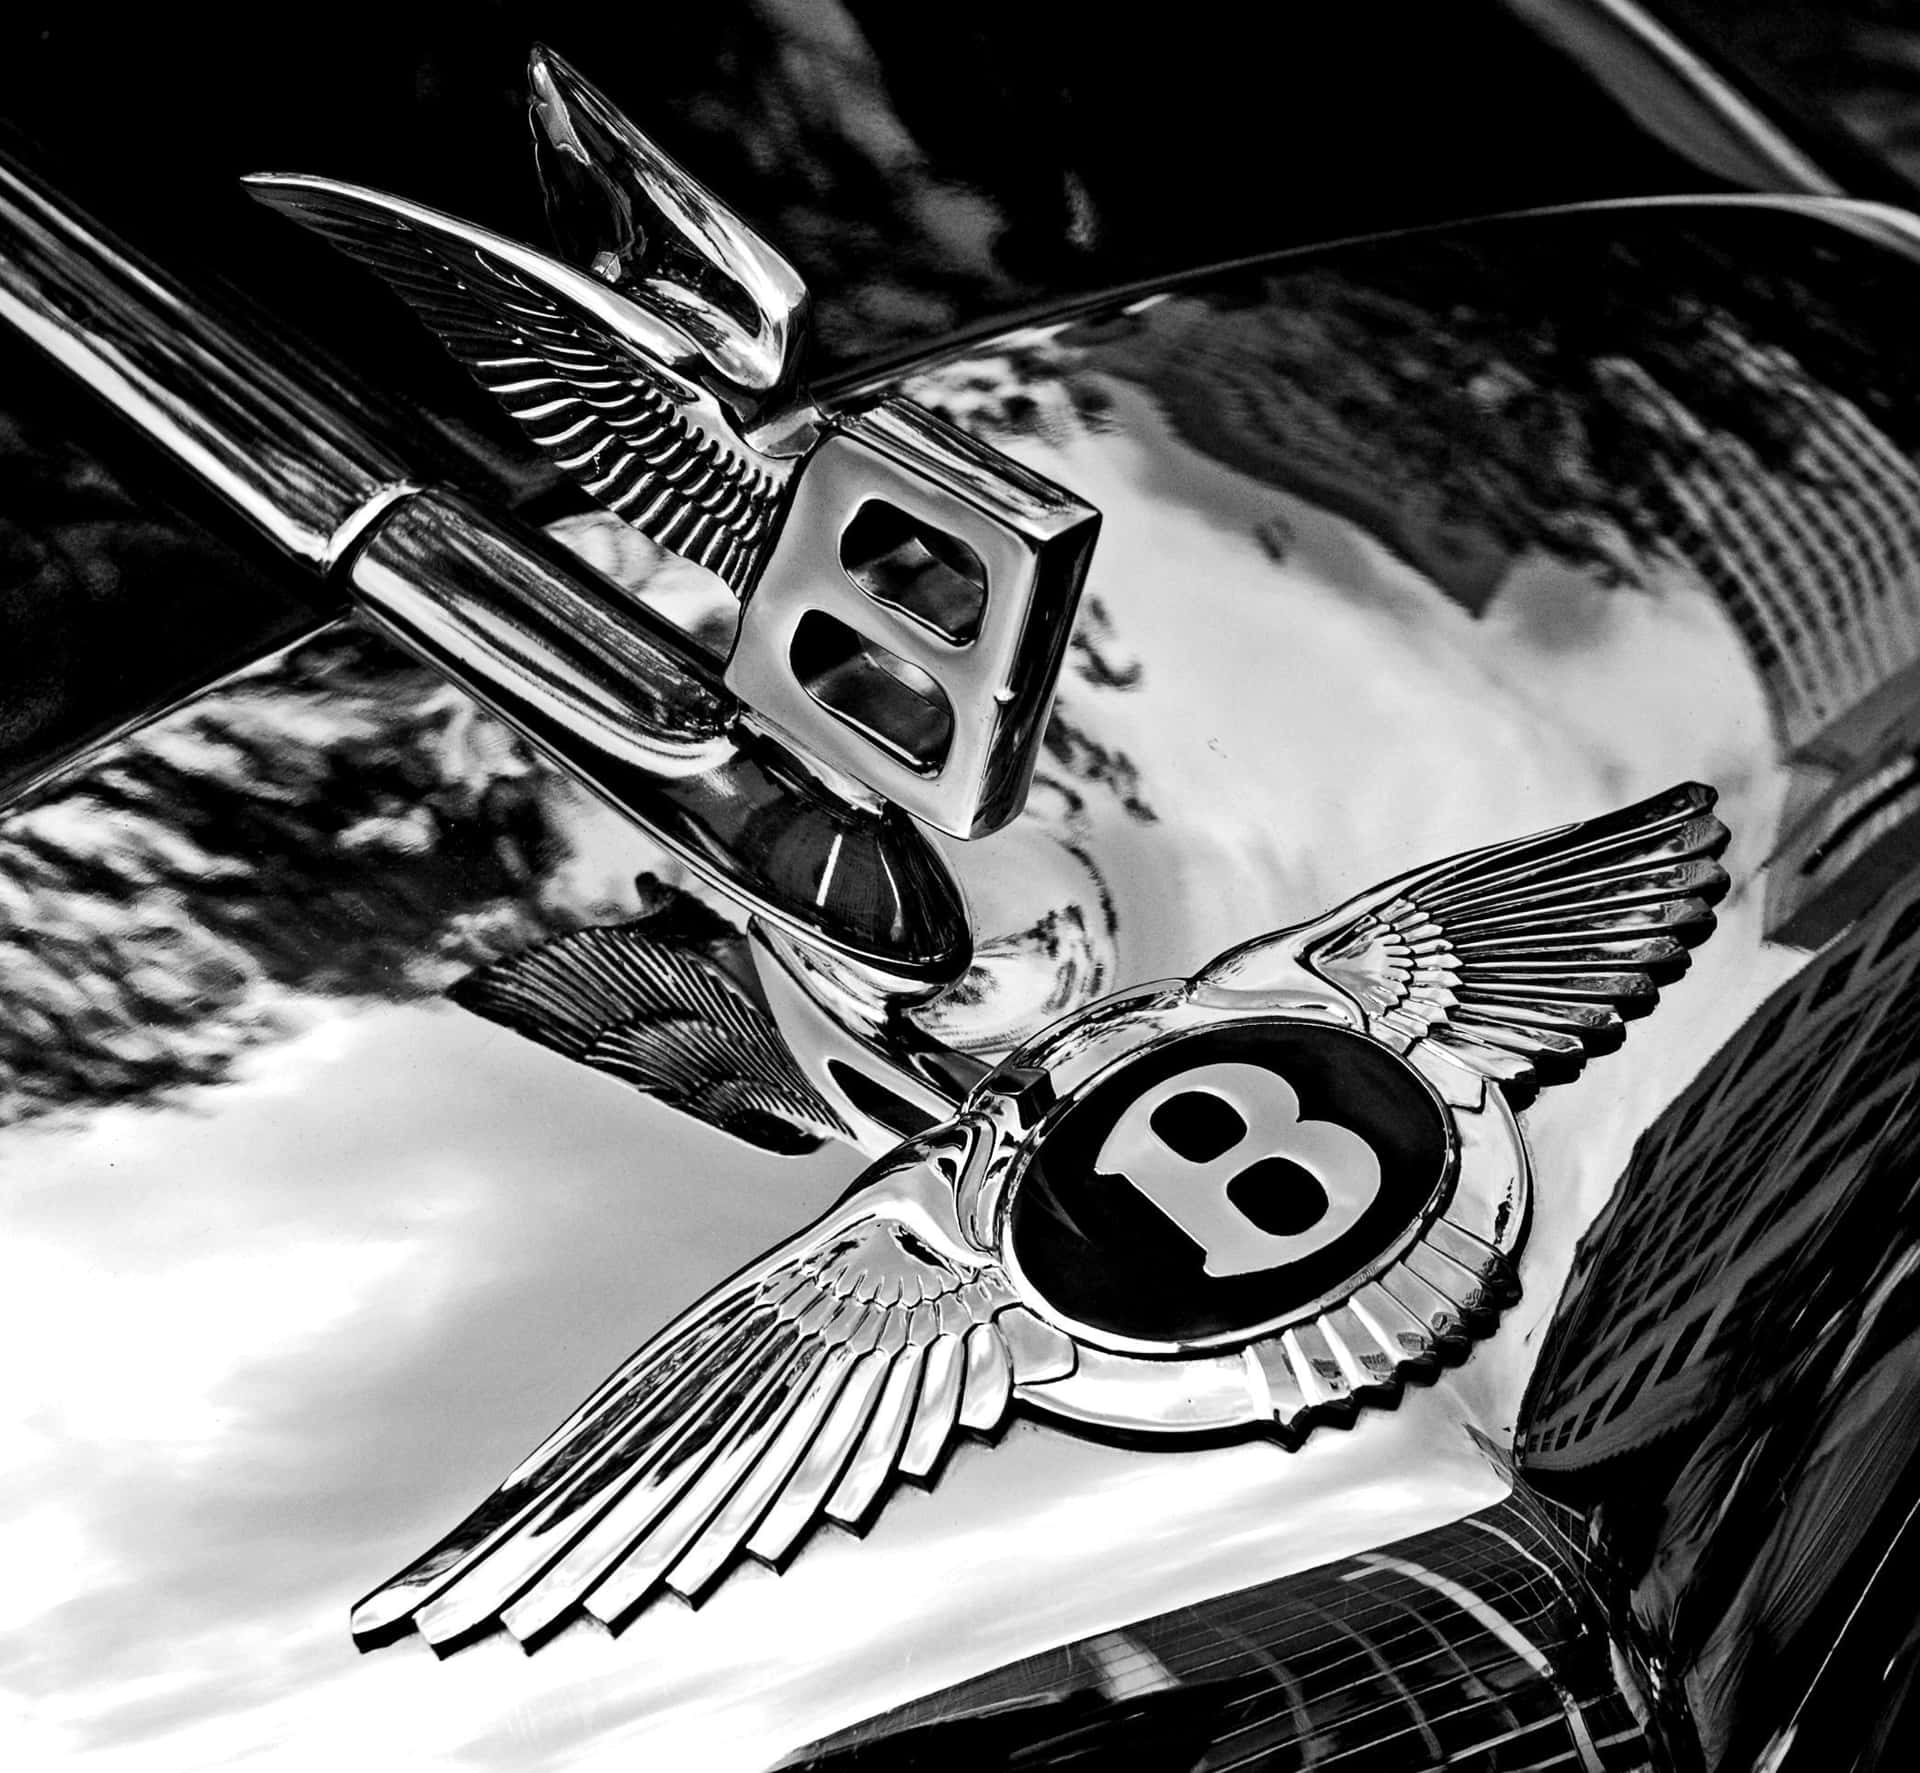 Luxury at Its Finest: The Bentley Continental